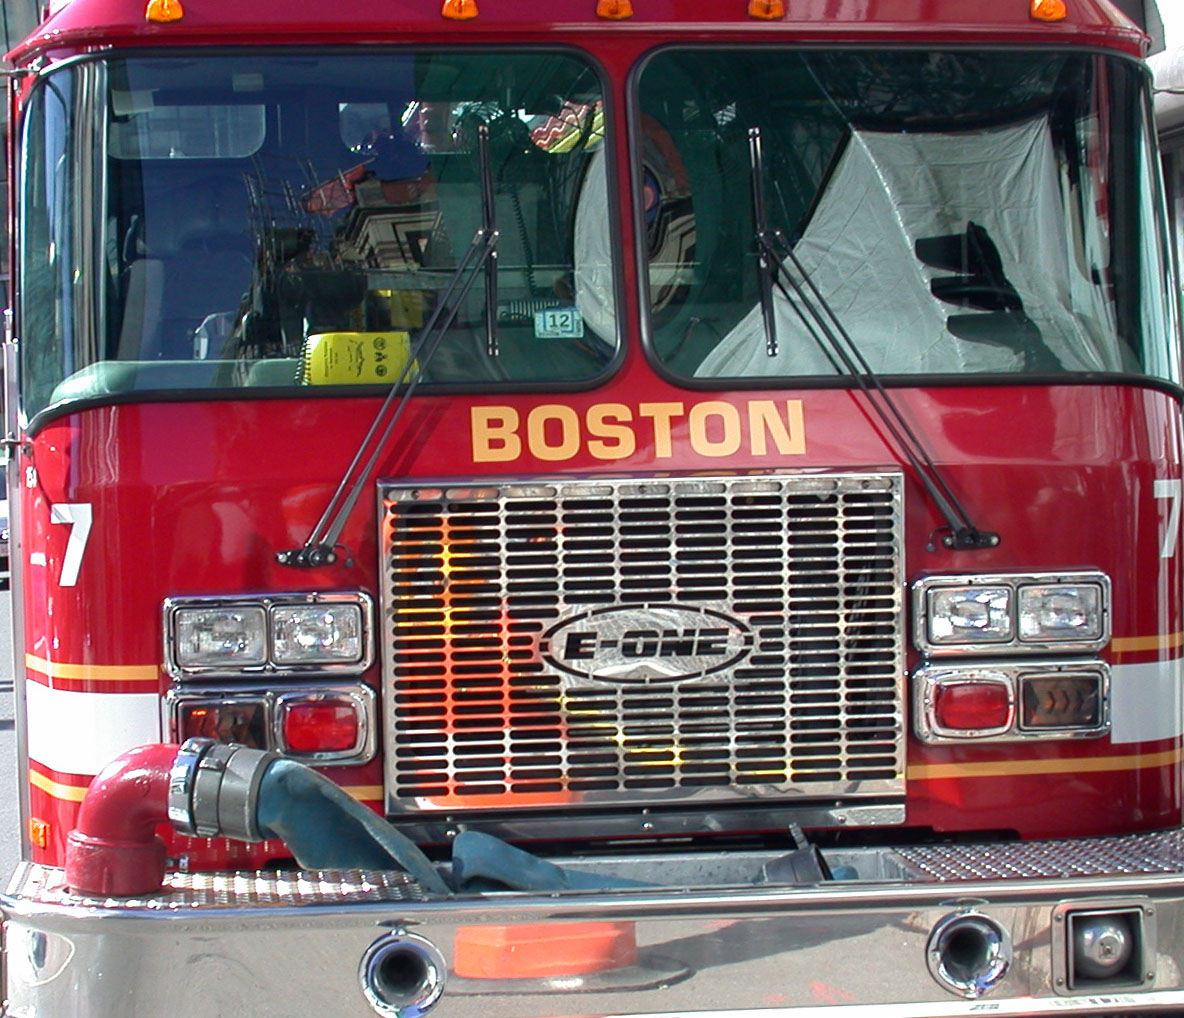 Boston Fire Engine Emergency One all rights reserved Ernest J. Bordini, Ph.D.